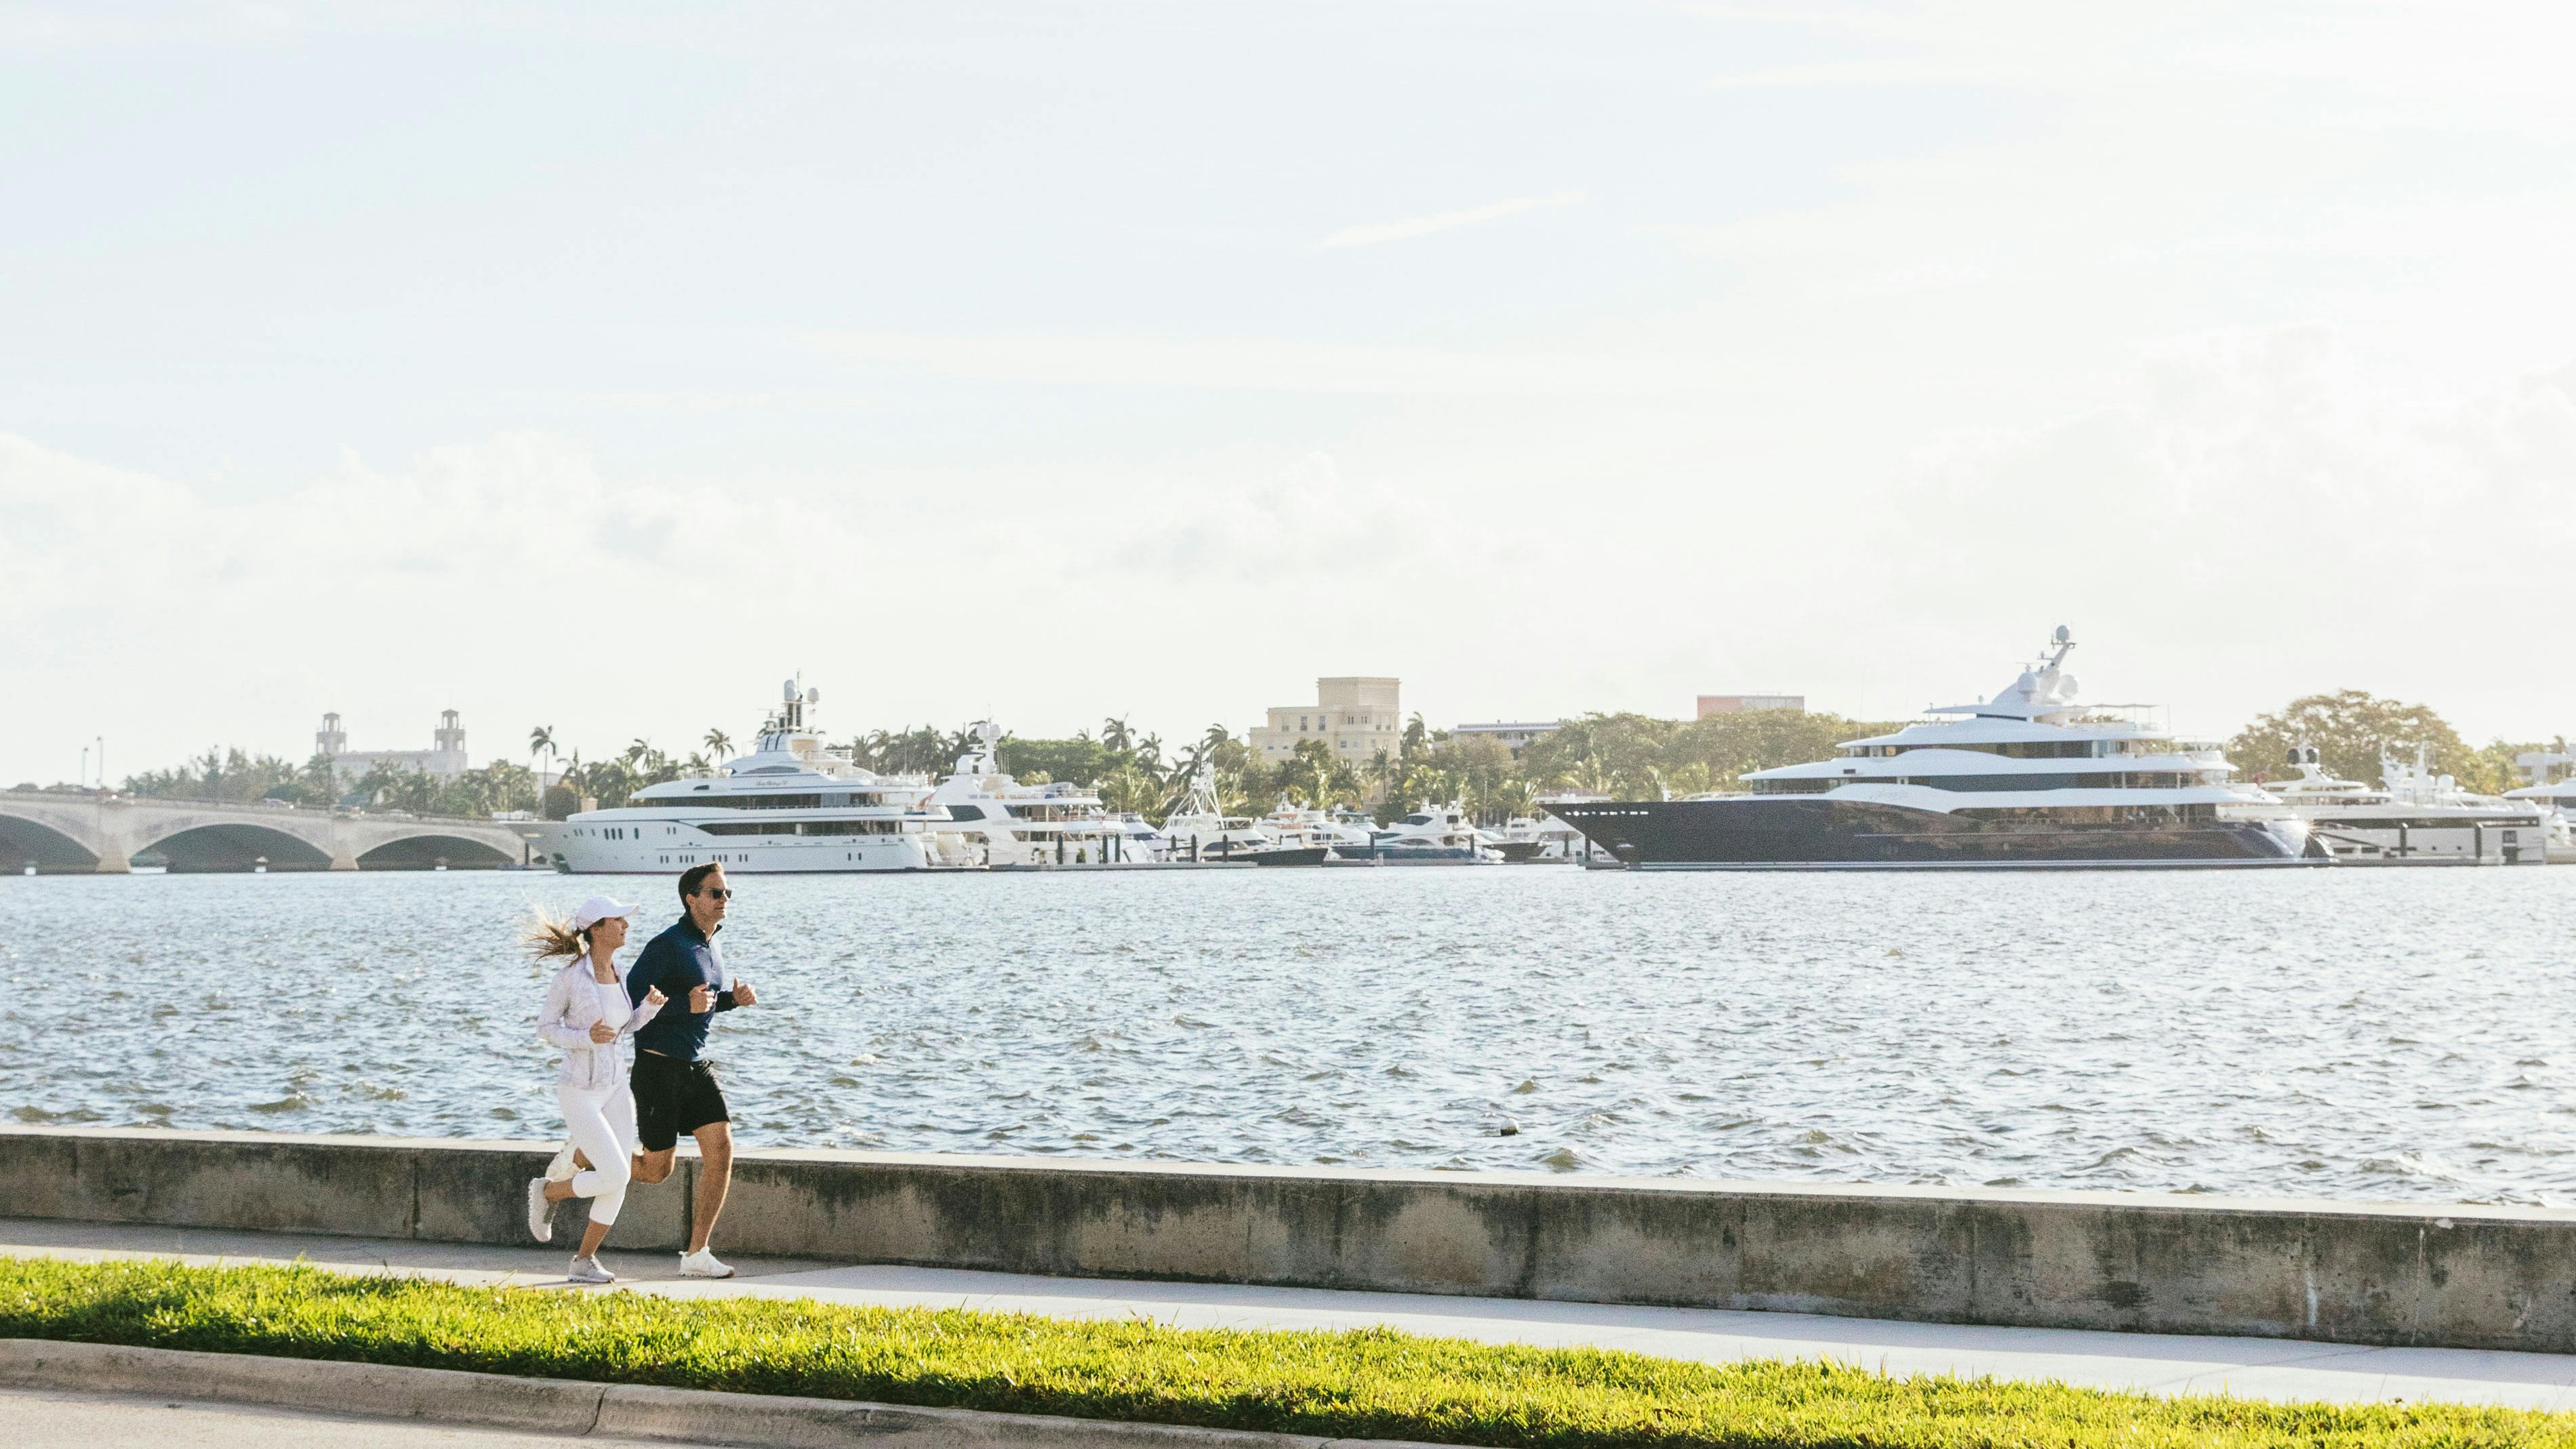 A man and woman in fitness attire running on a sidewalk with a yacht marina in the background.